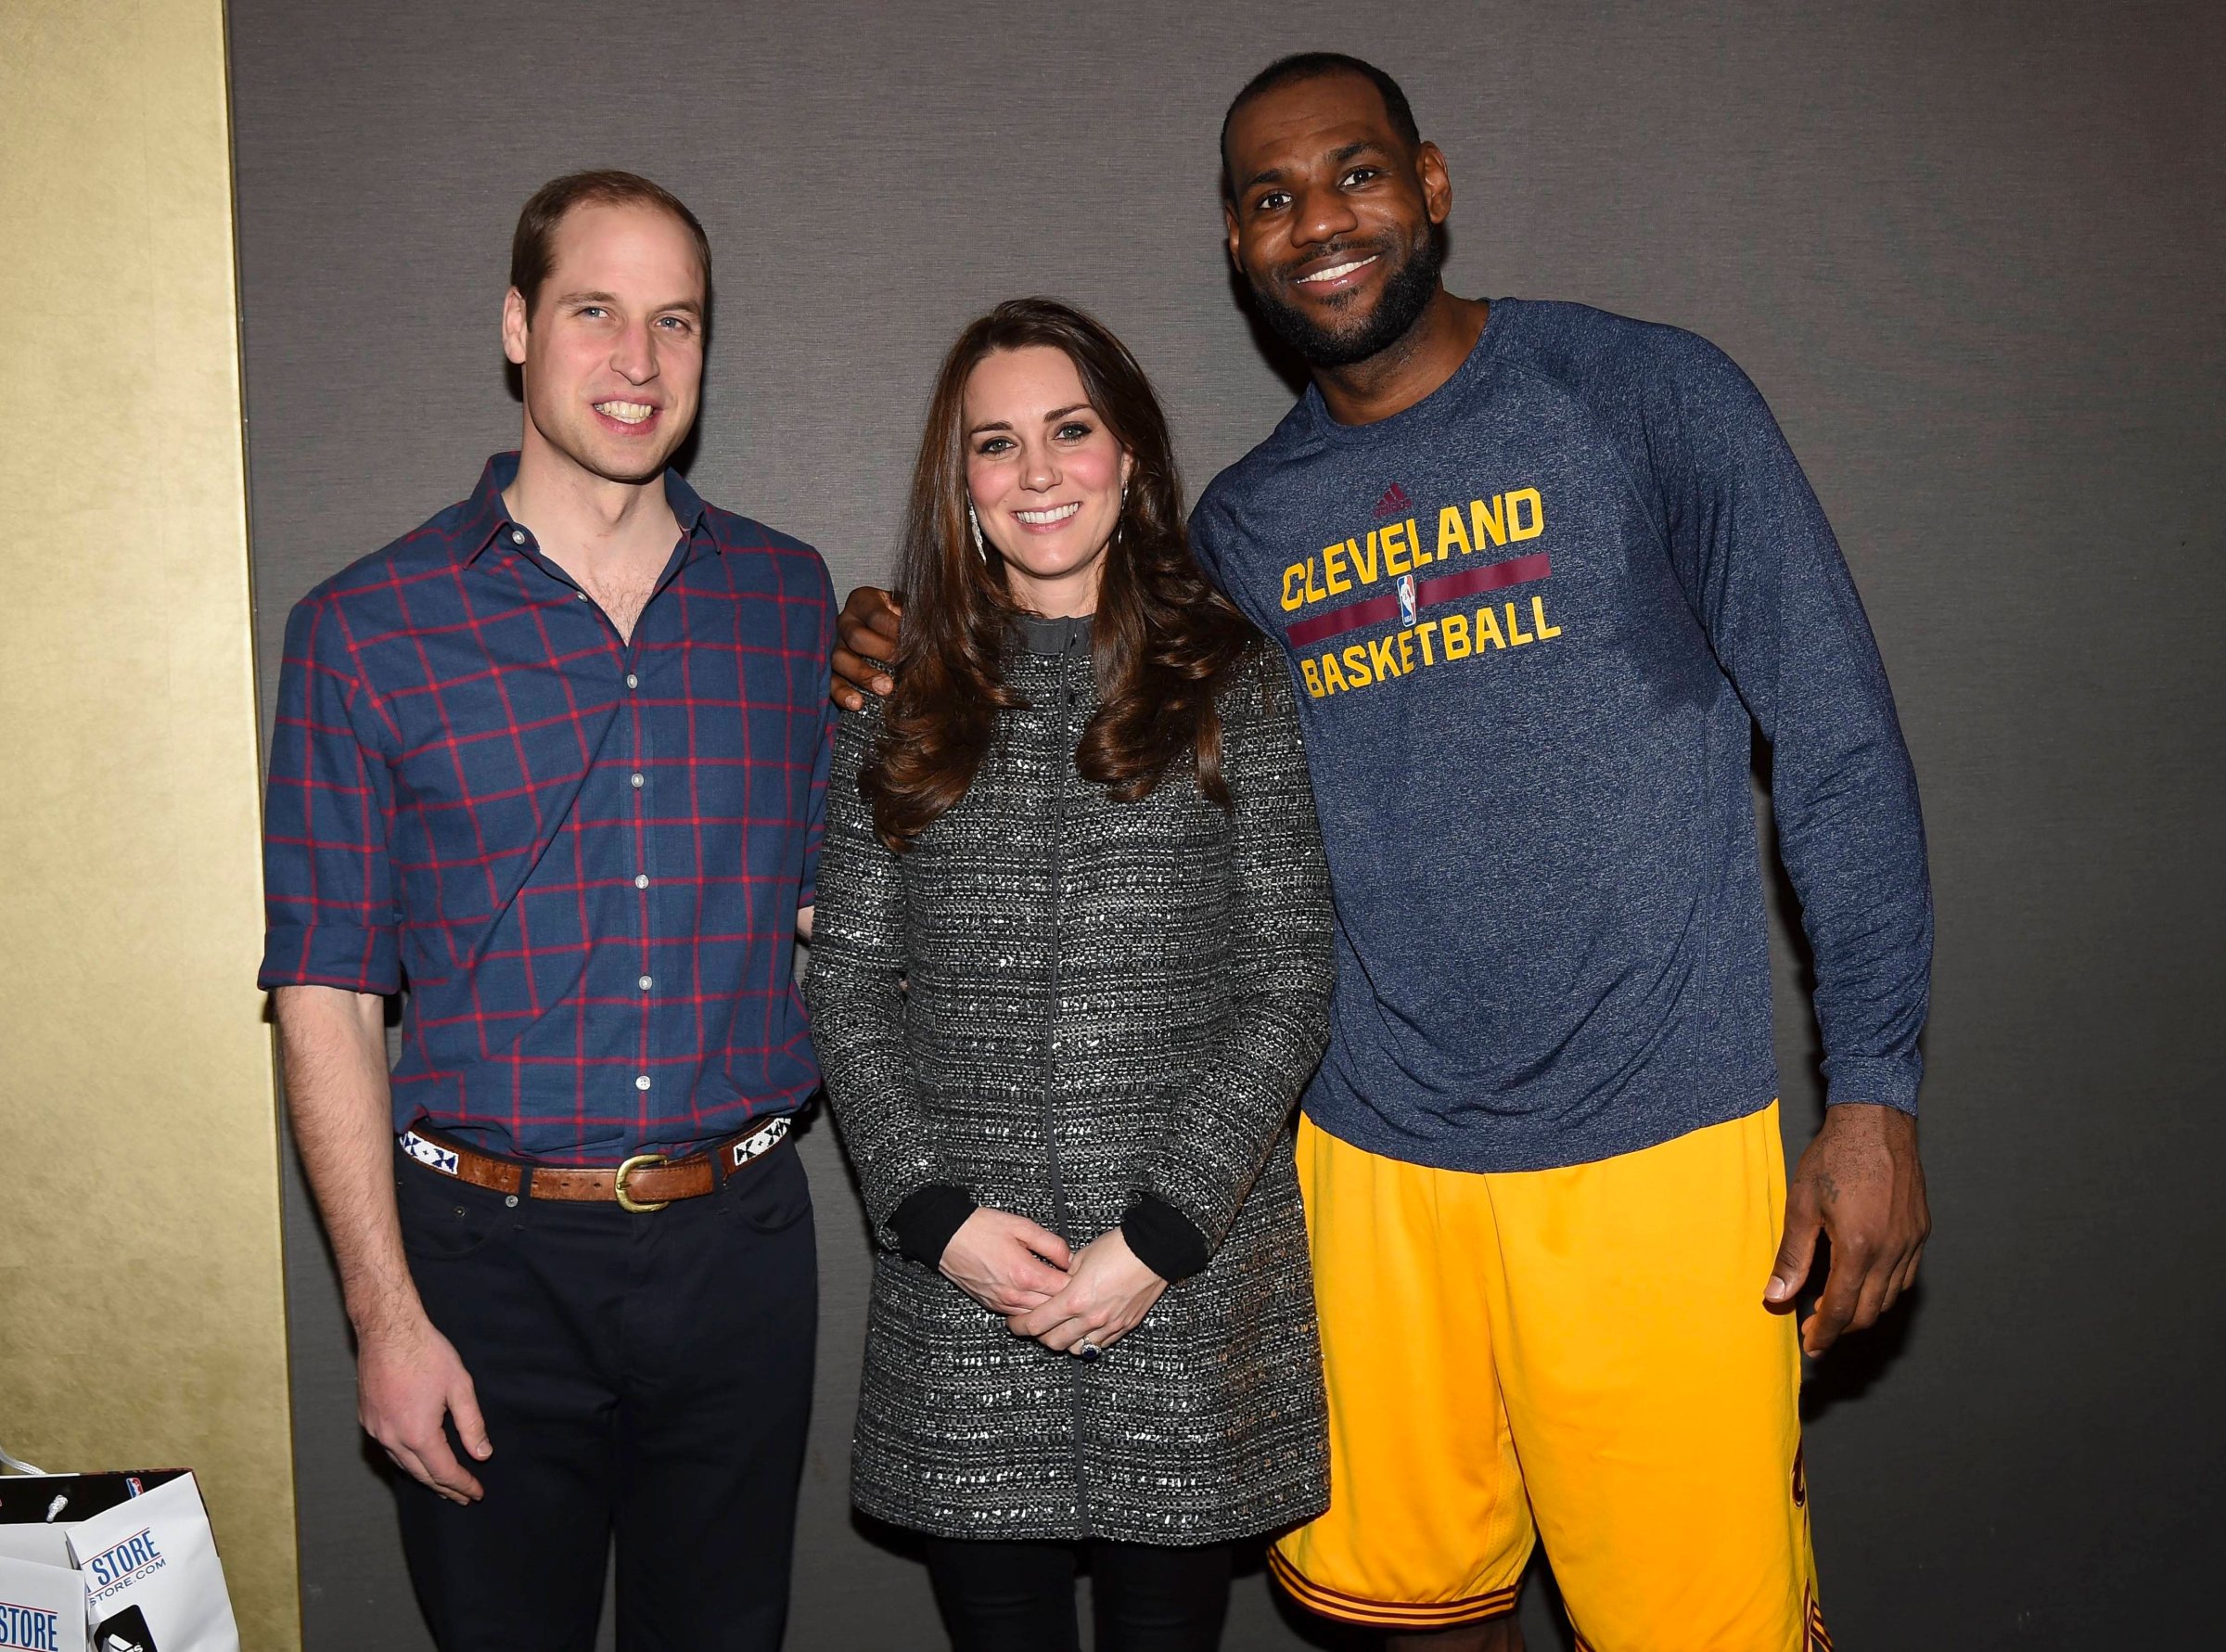 Catherine Duchess of Cambridge and Prince William with Lebron James at the Brooklyn Nets vs. Cleveland Cavaliers, NBA Basketball game on Dec. 8, 2014 in New York.